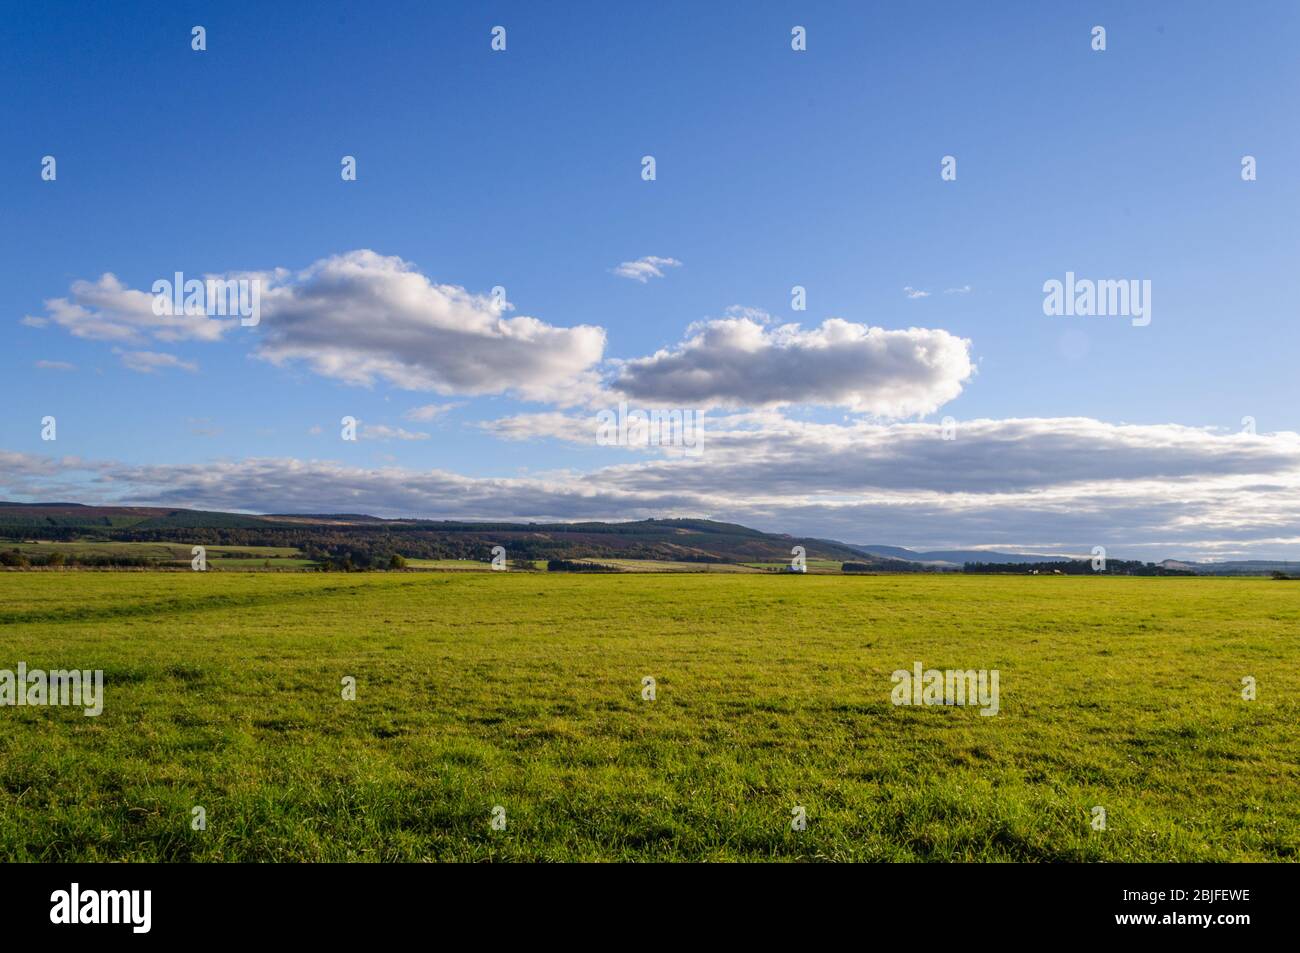 Drummossie Moor, the site of the Battle of Culloden in 1746 near Inverness in the Scottish Highlands Stock Photo